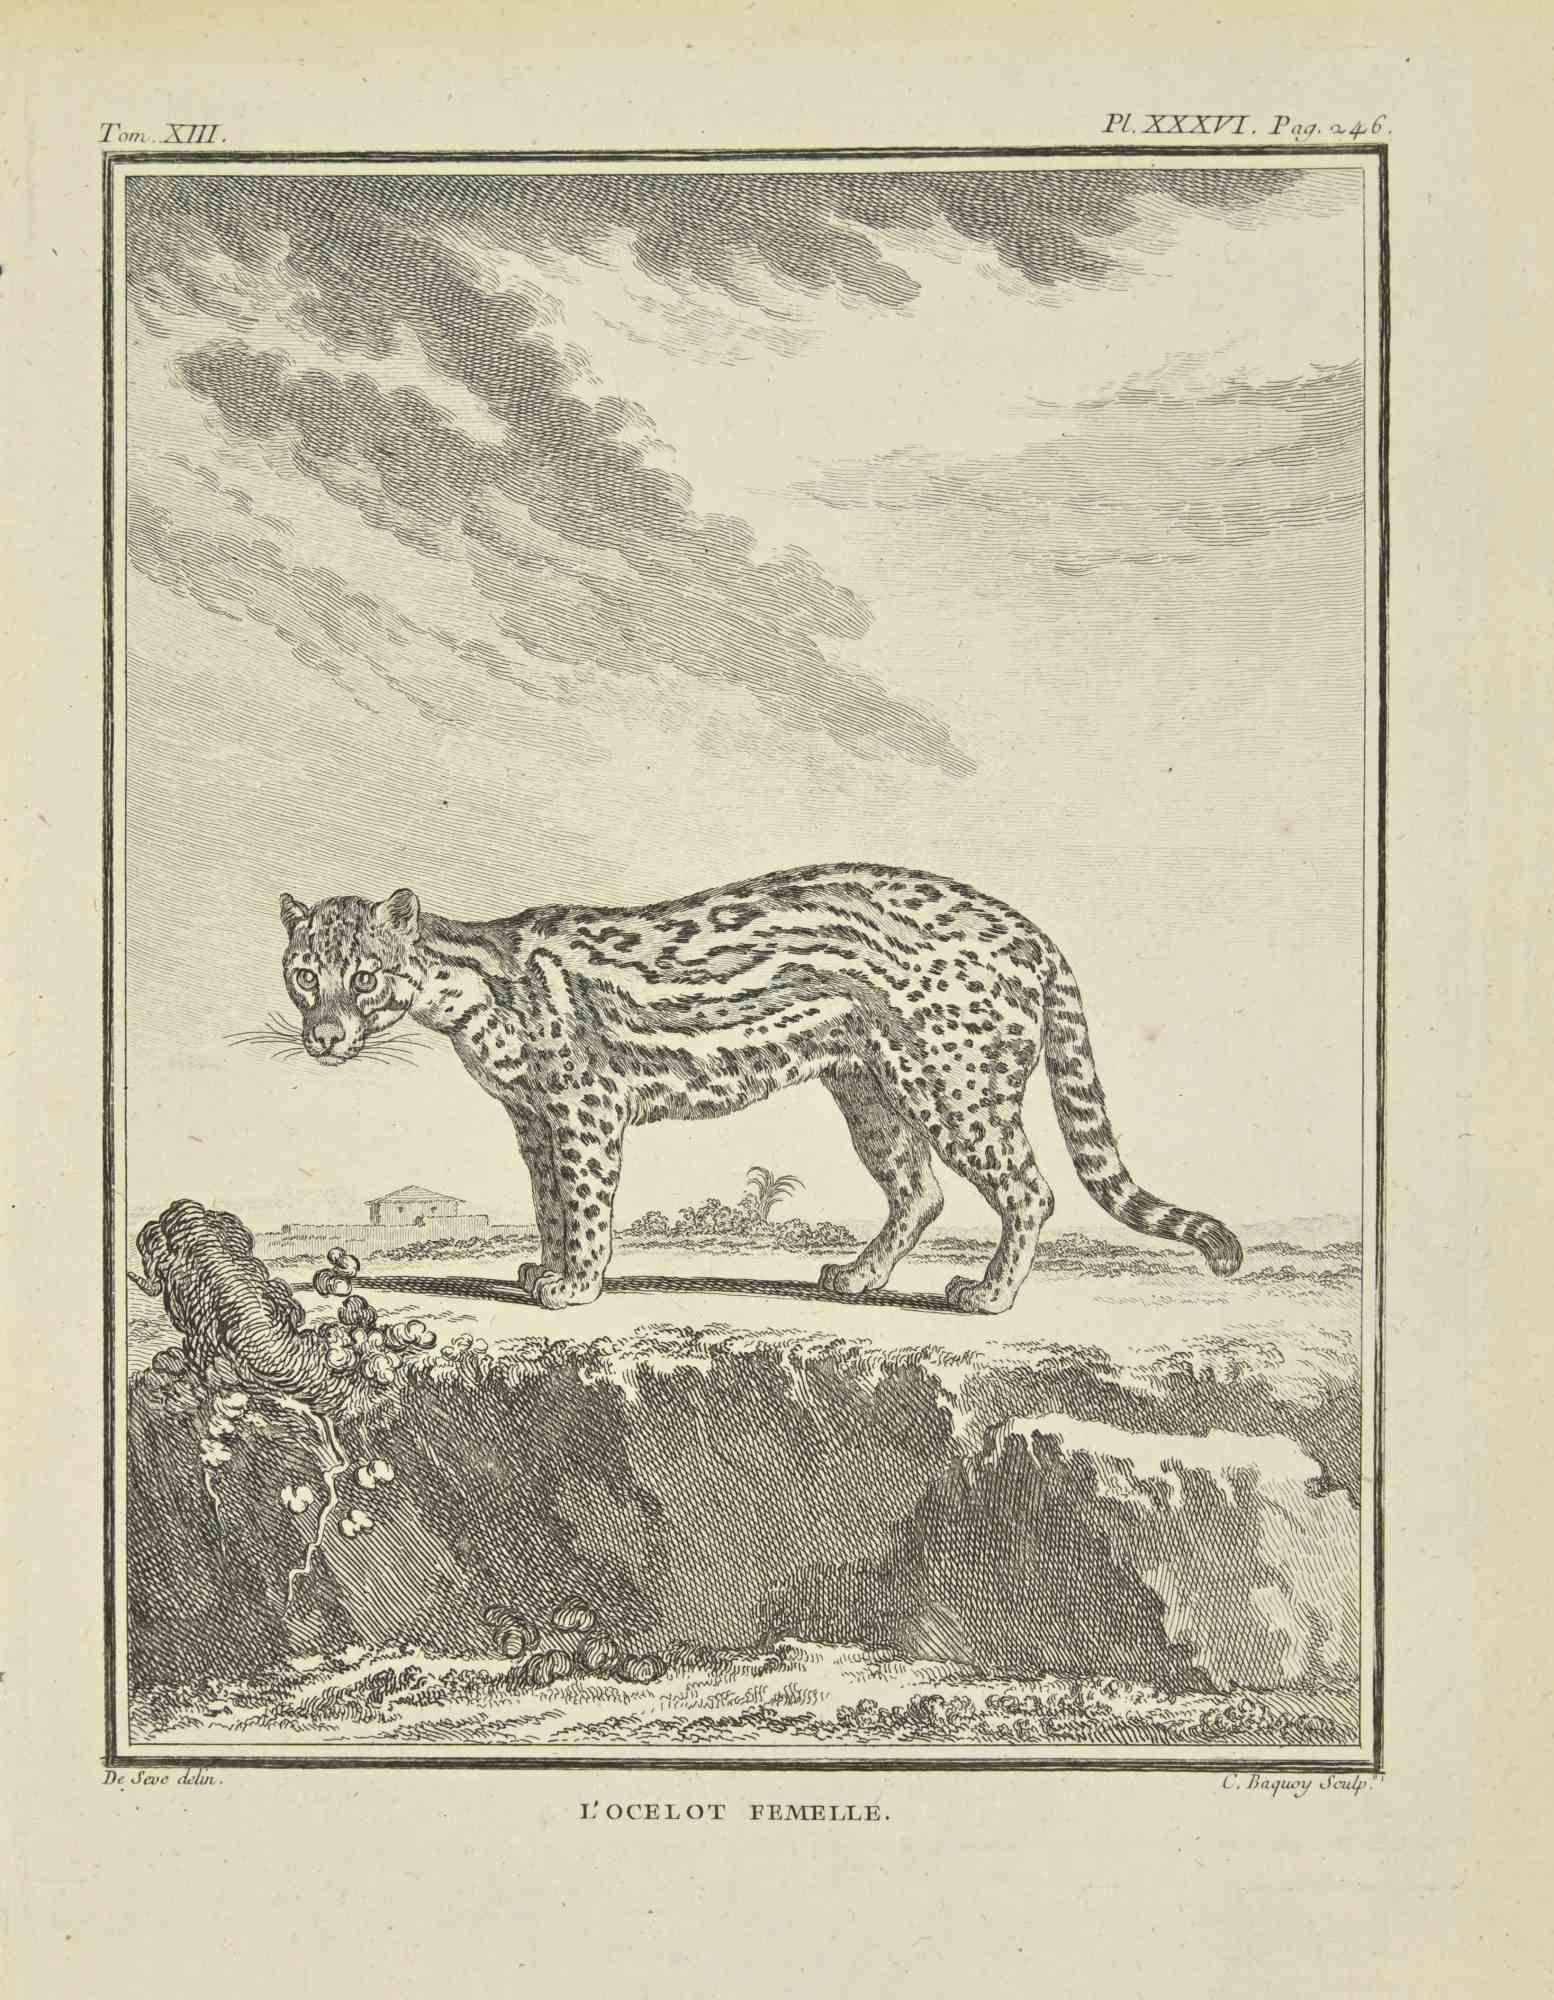 L'Ocelot Femelle - Etching by Jean Charles Baquoy - 1771